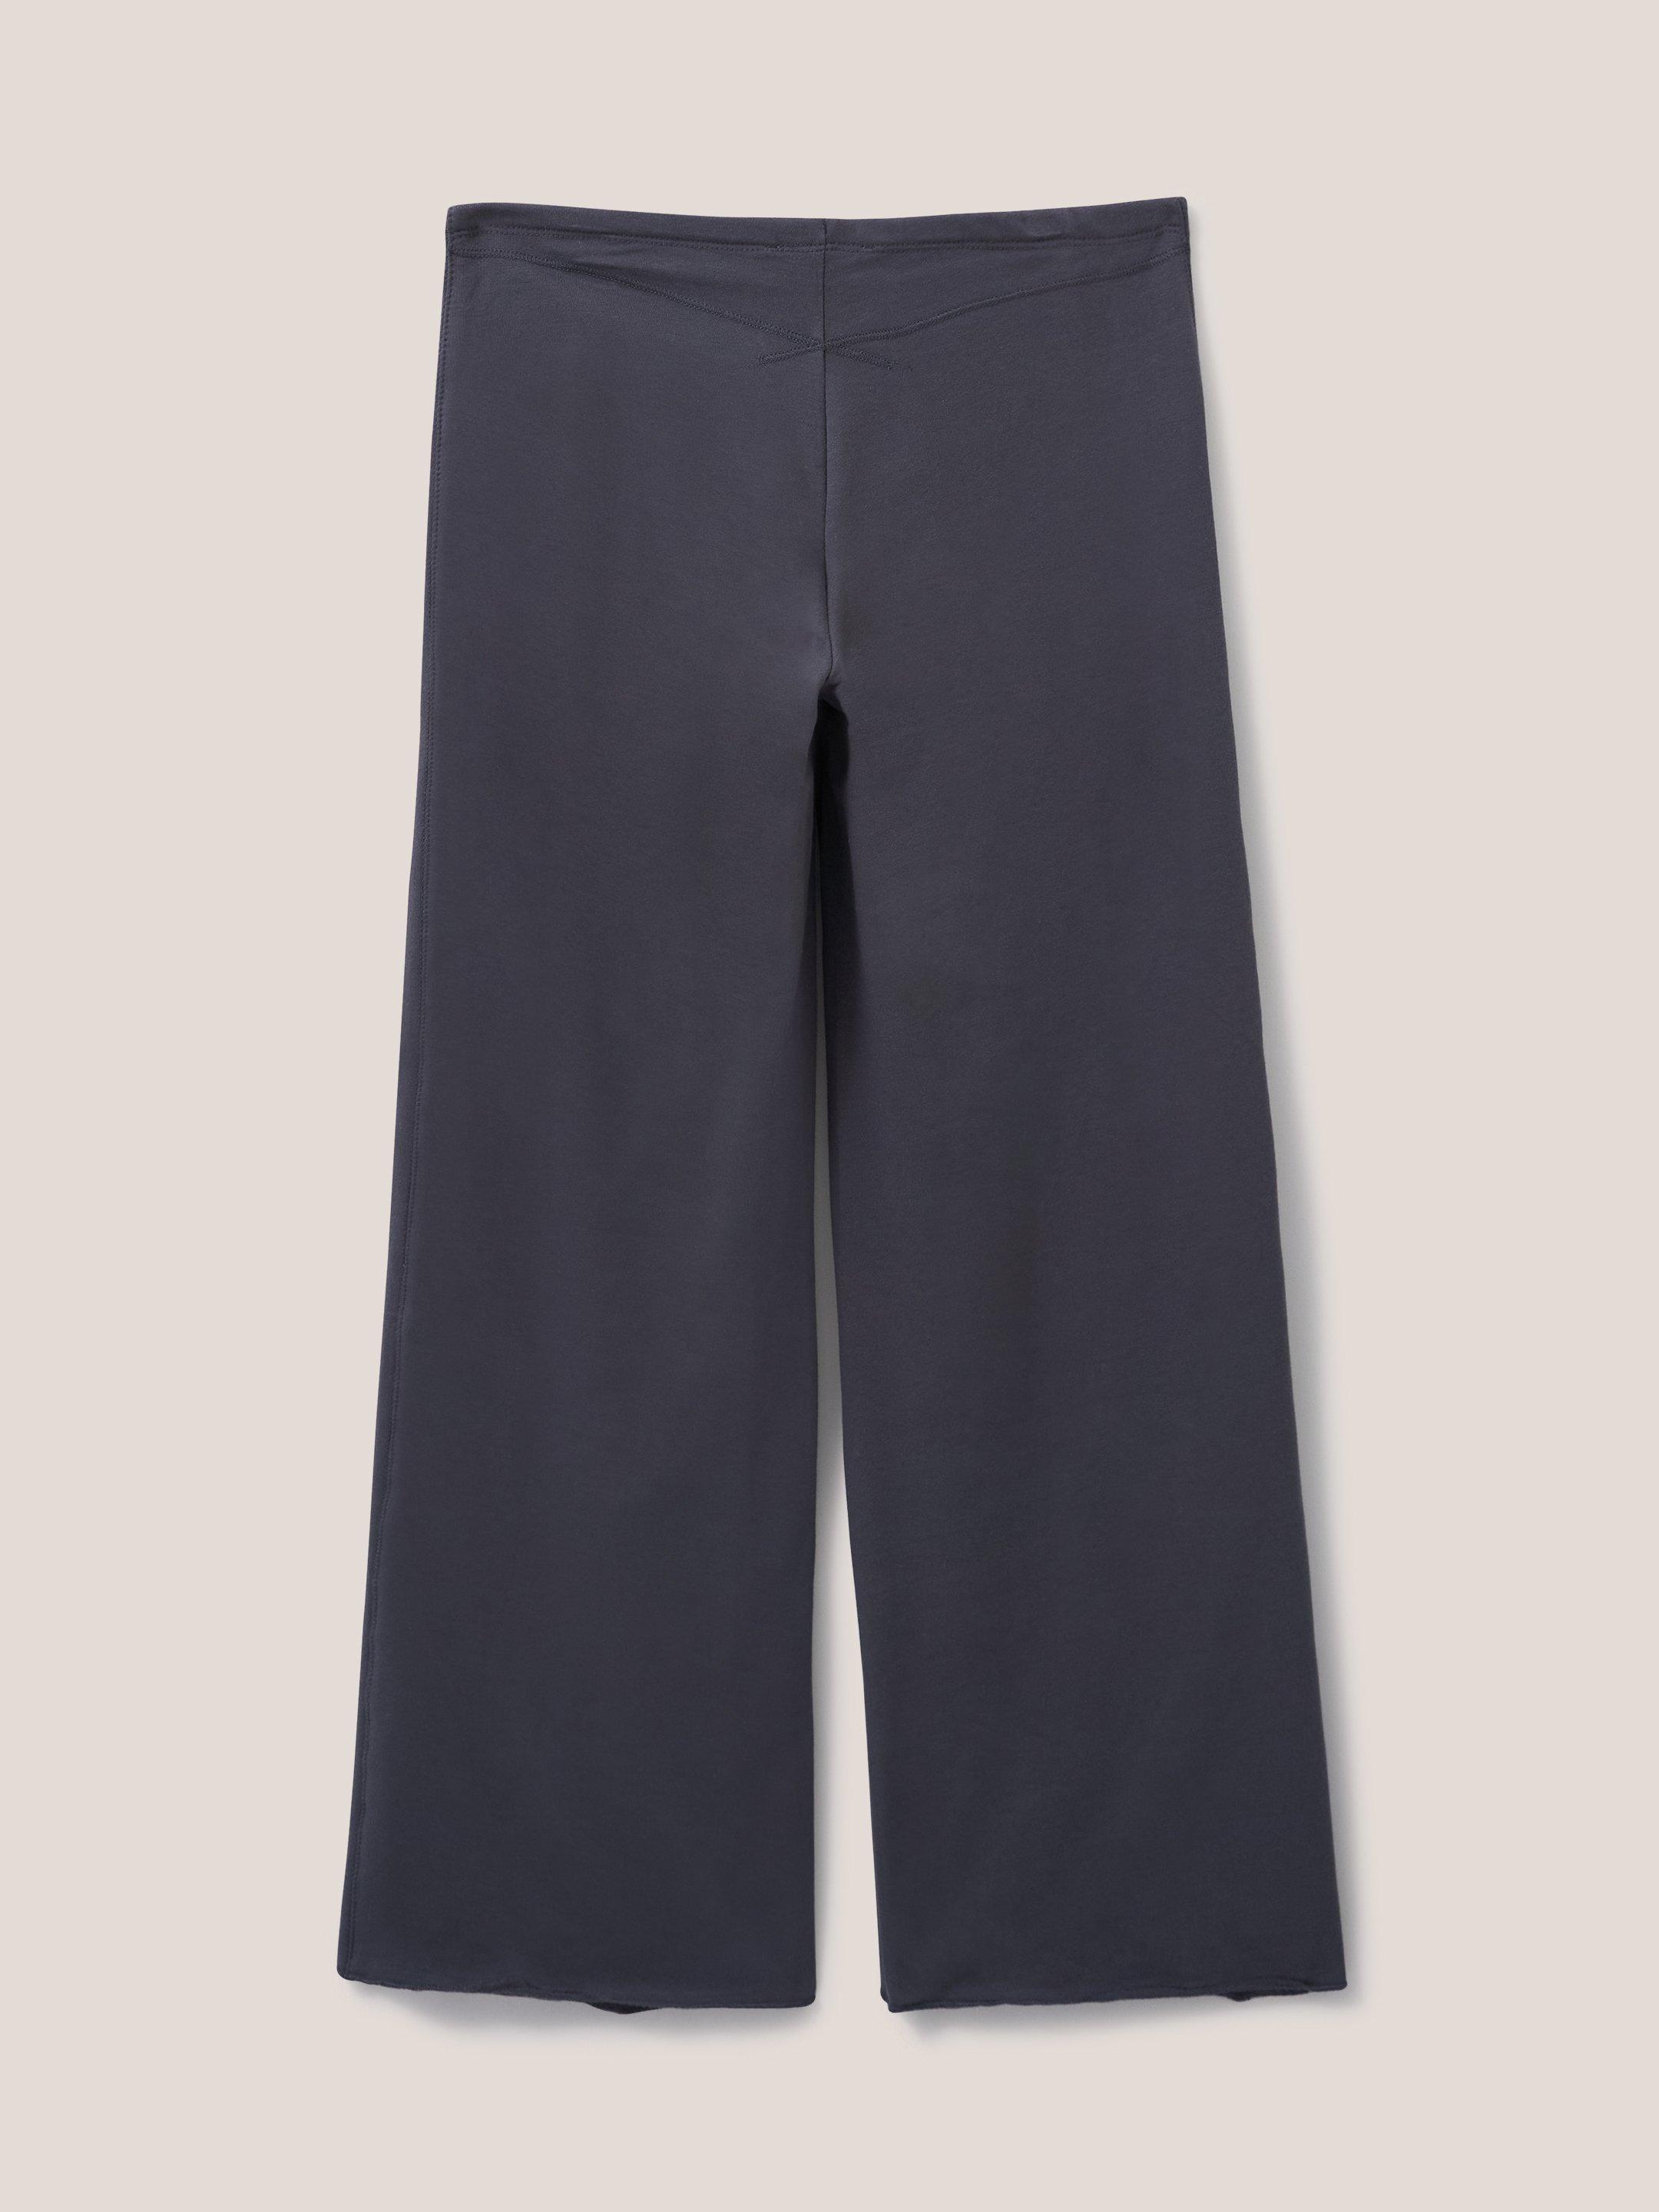 Dolce Organic Pant in CHARC GREY - FLAT BACK